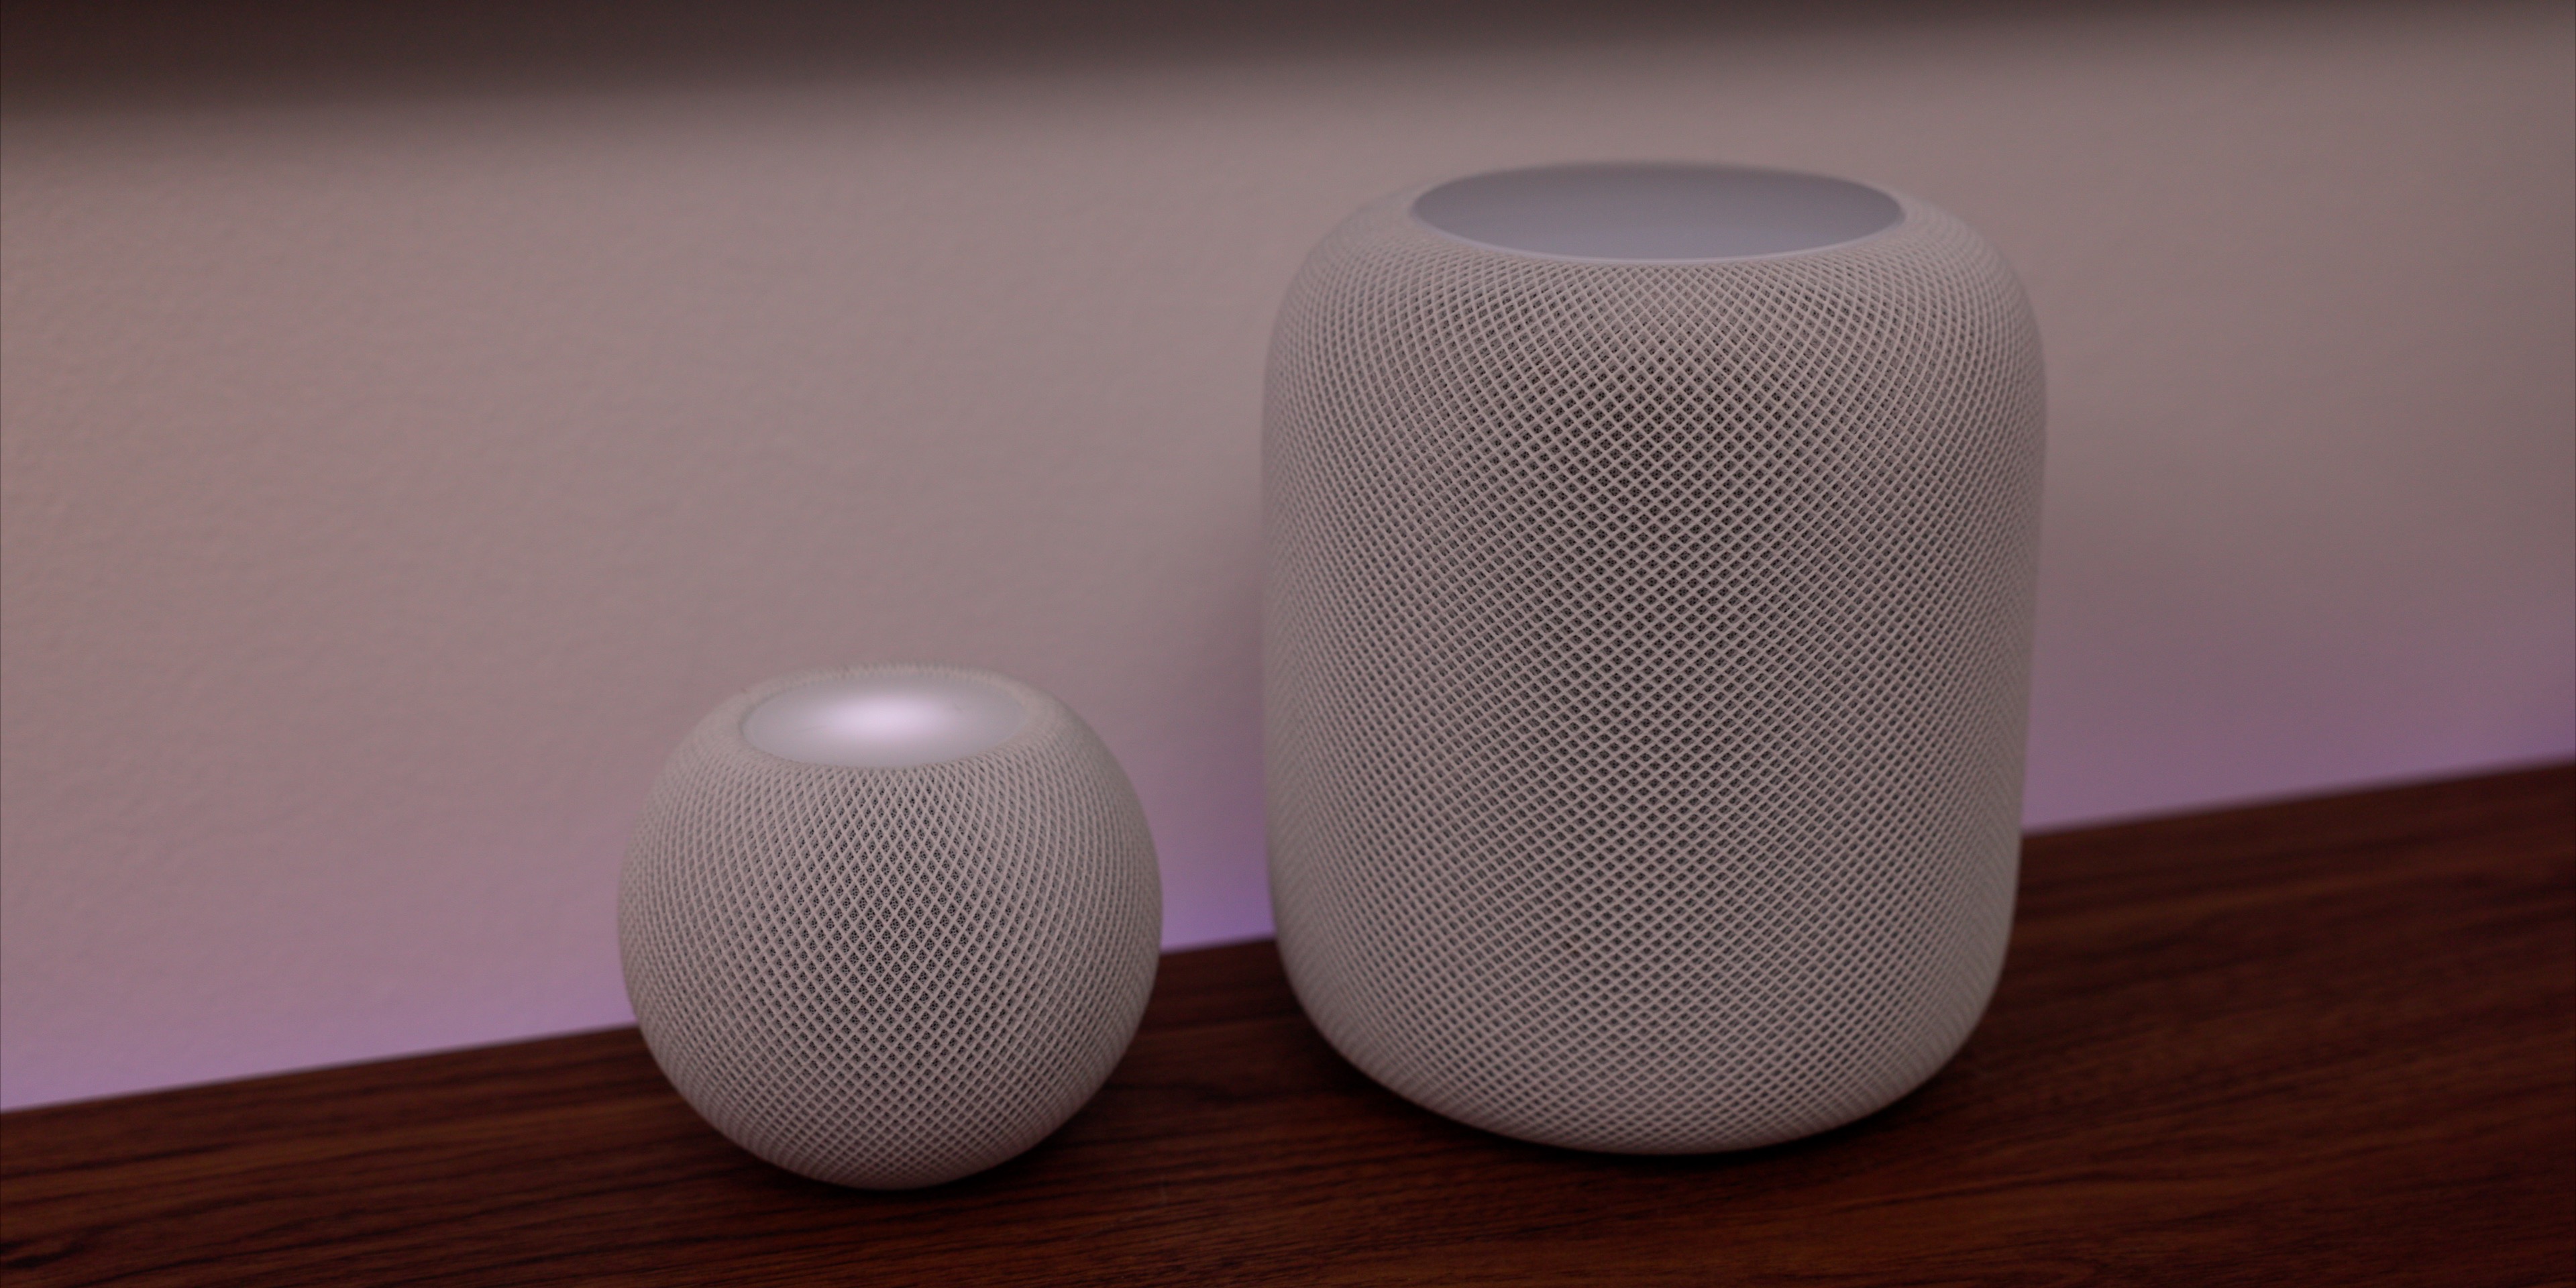 How I Fell In Love with AirPlay 2 with HomePod, Apple TV and